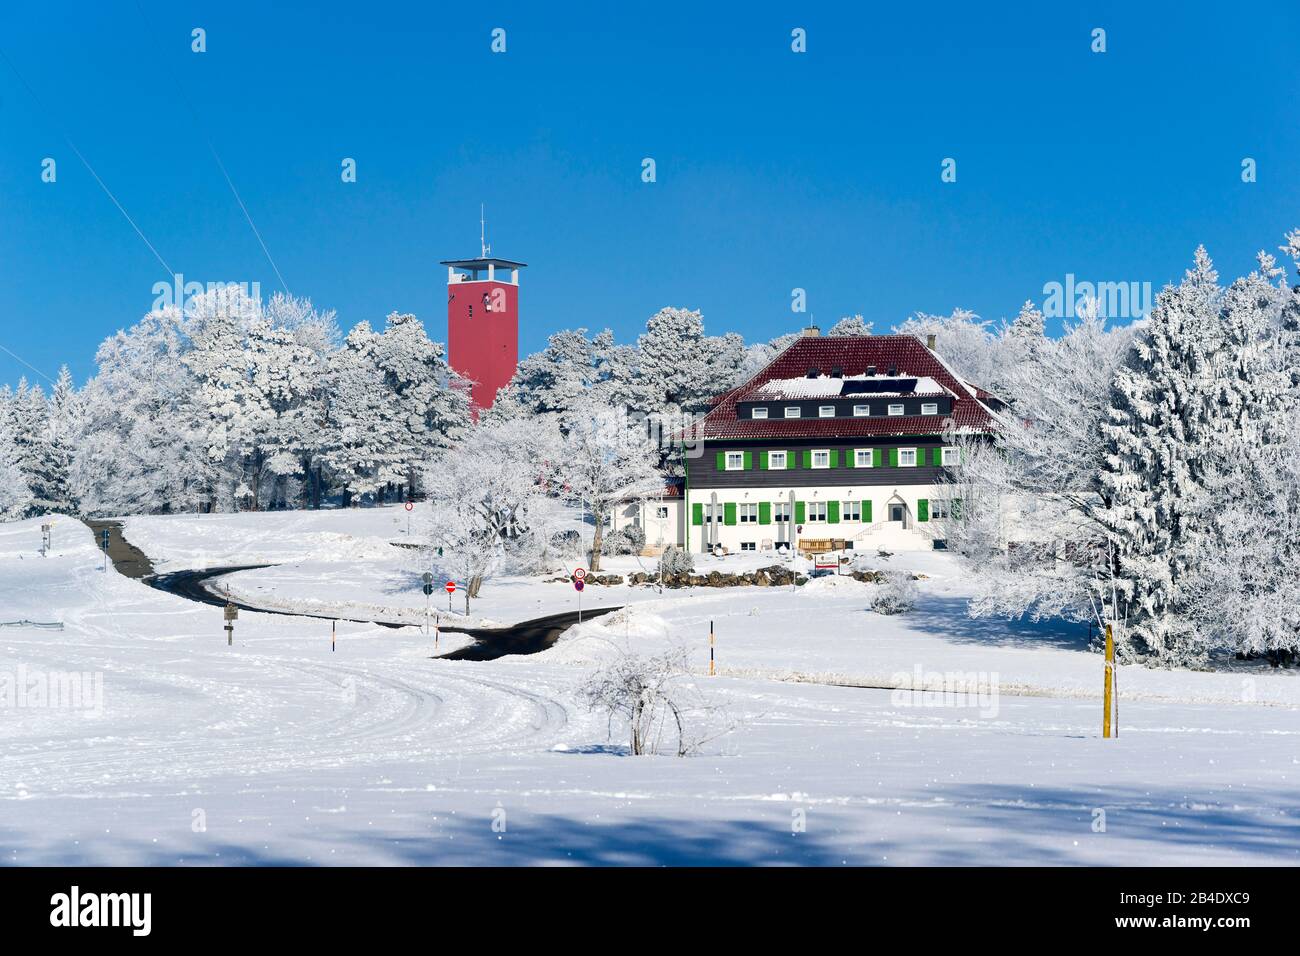 Germany, Baden-Württemberg, Albstadt-Onstmettingen, Wanderheim Nails house on the Raichberg, left next to the Raichbergturm, a lookout tower of the Swabian Albverein. The hiking house Nägelehaus on the Raichberg offers catering and accommodation. The name of the house was given by Eugen Nägele, who was chairman of the Swabian Albverein from 1913 to 1933. In 1969, the European Walking Federation was founded in Nägelehaus. Stock Photo